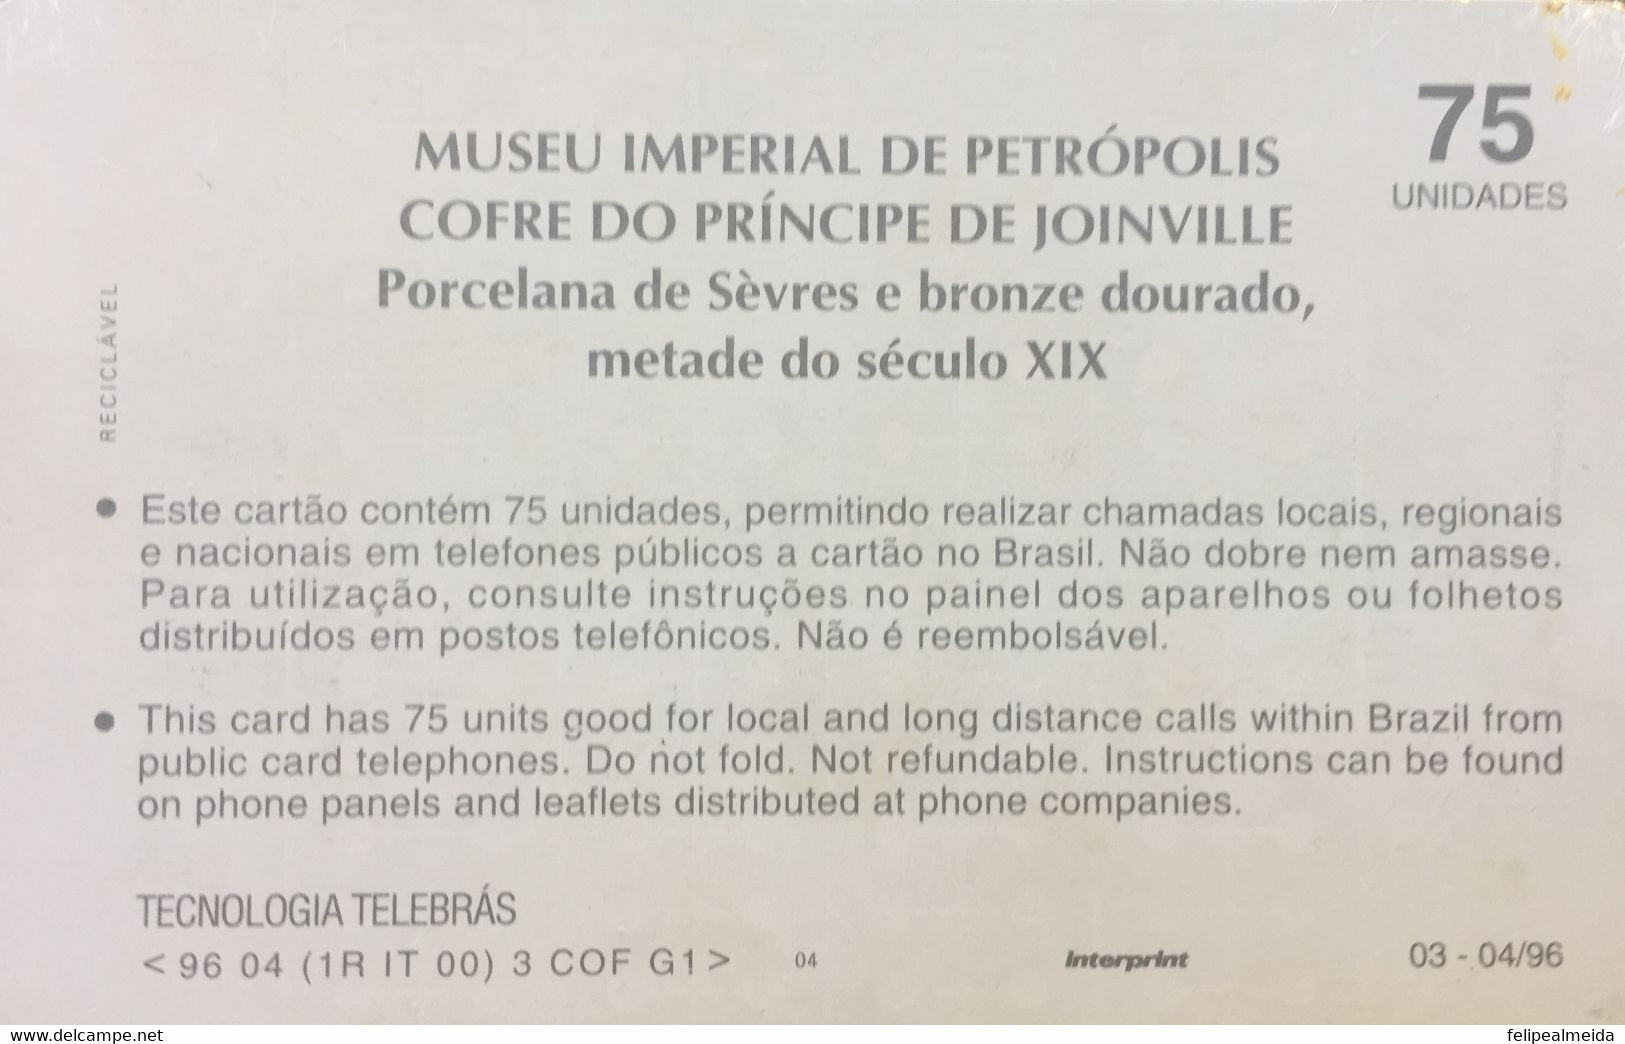 Phone Card Manufactured By Telebras In 1996 - Series Museums - Imperial Museum Of Pretrópolis - Coffer Of The Prince Of - Culture